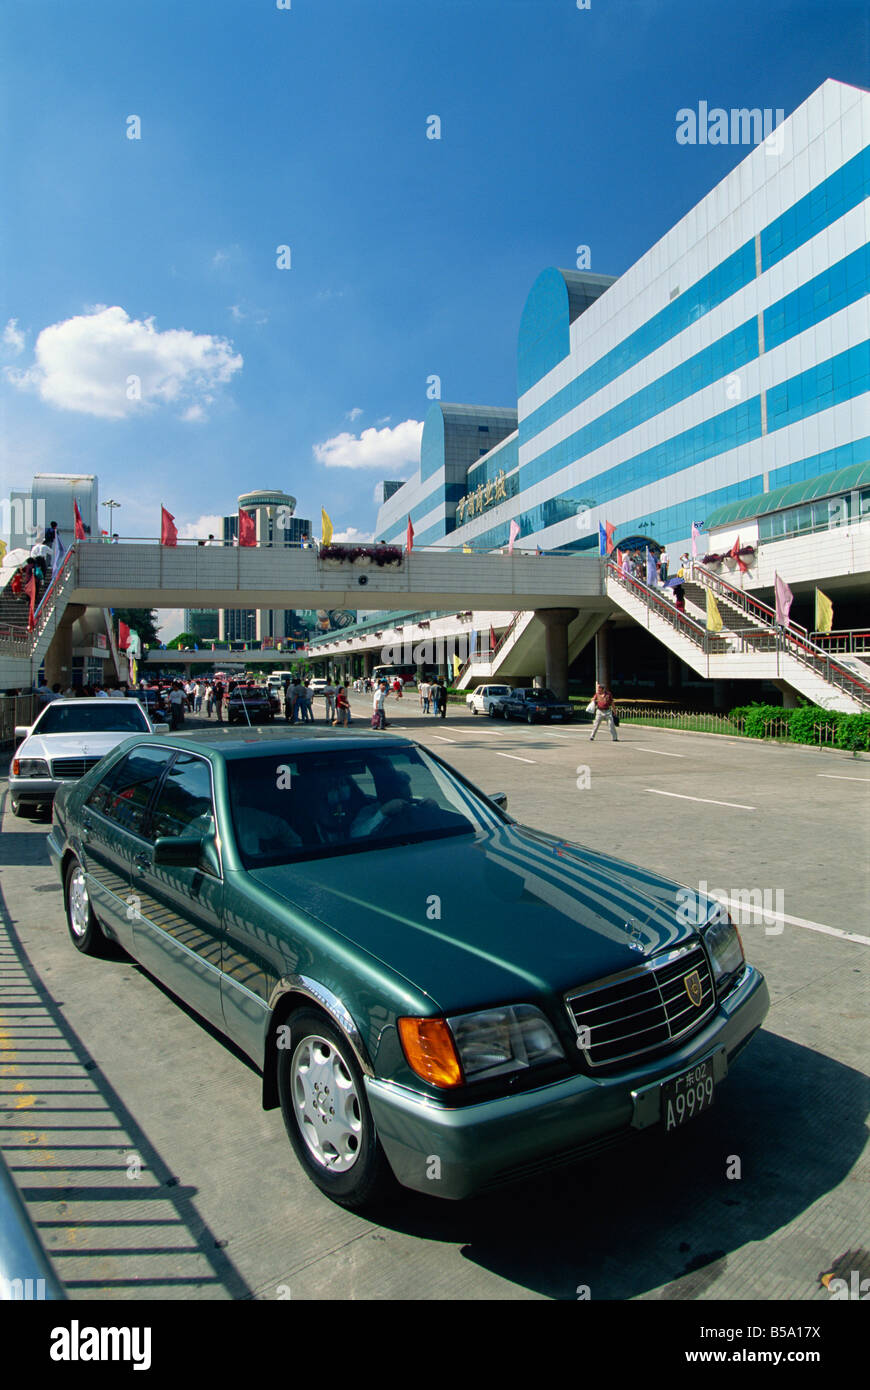 Mercedes car in Shenzhen City, the Special Economic Zone boom town on the border with Hong Kong, China Stock Photo